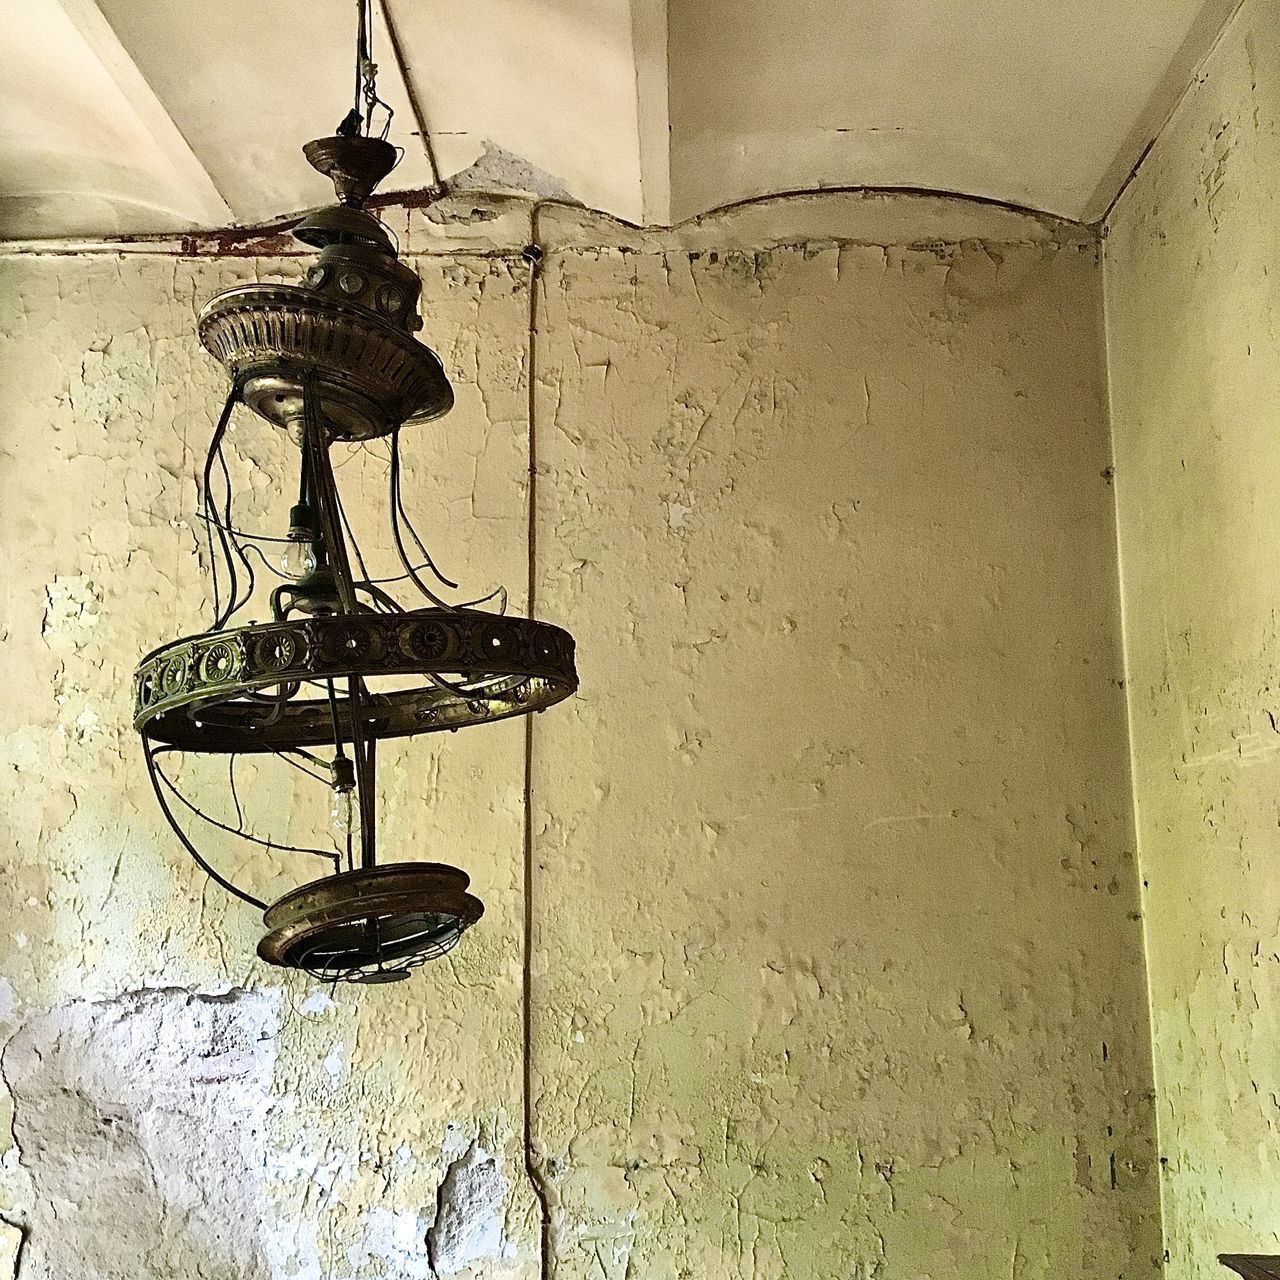 LOW ANGLE VIEW OF ELECTRIC LAMP ON WALL IN OLD BUILDING